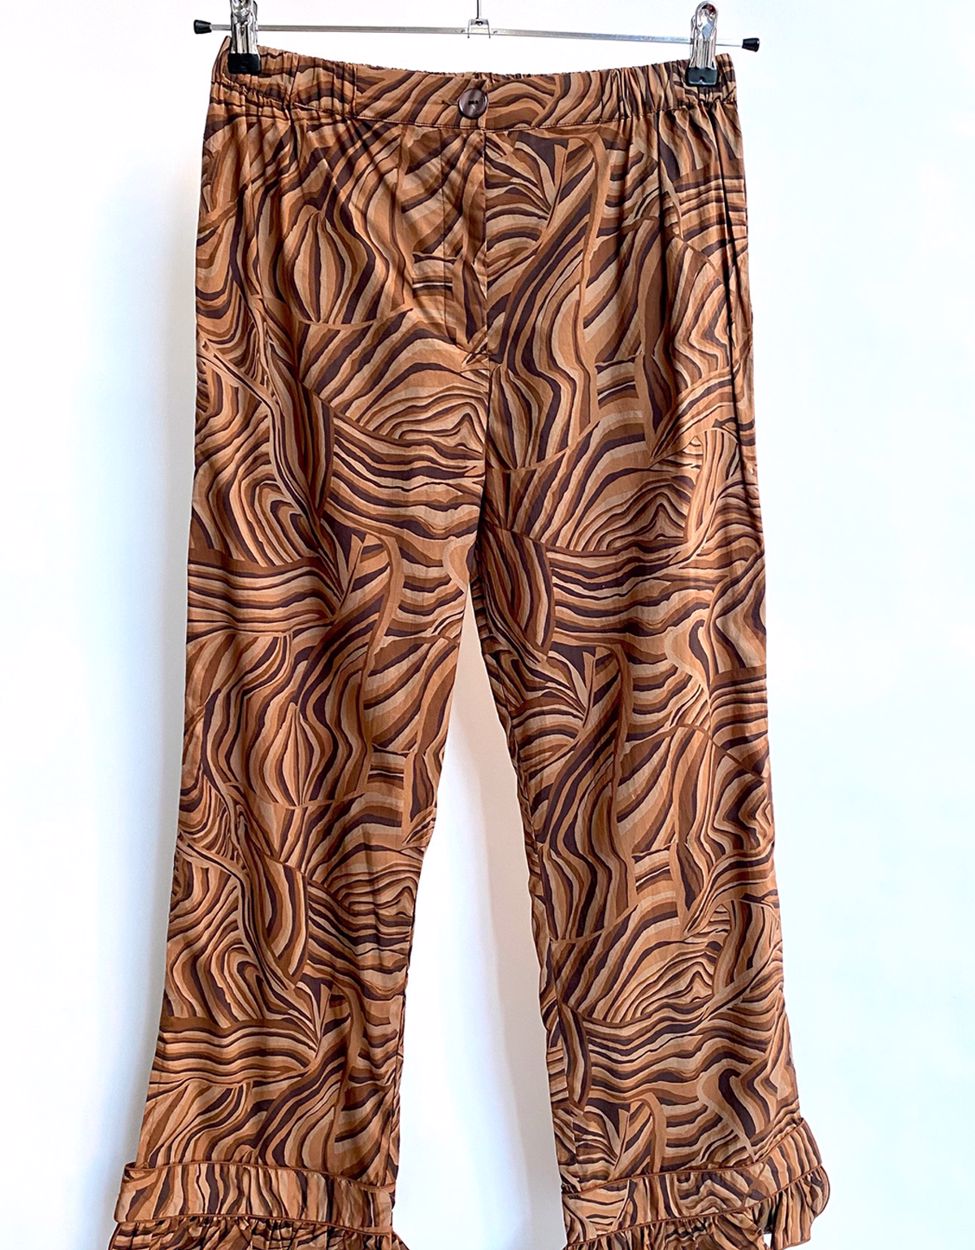 Helmstedt Pants - Size S/M 